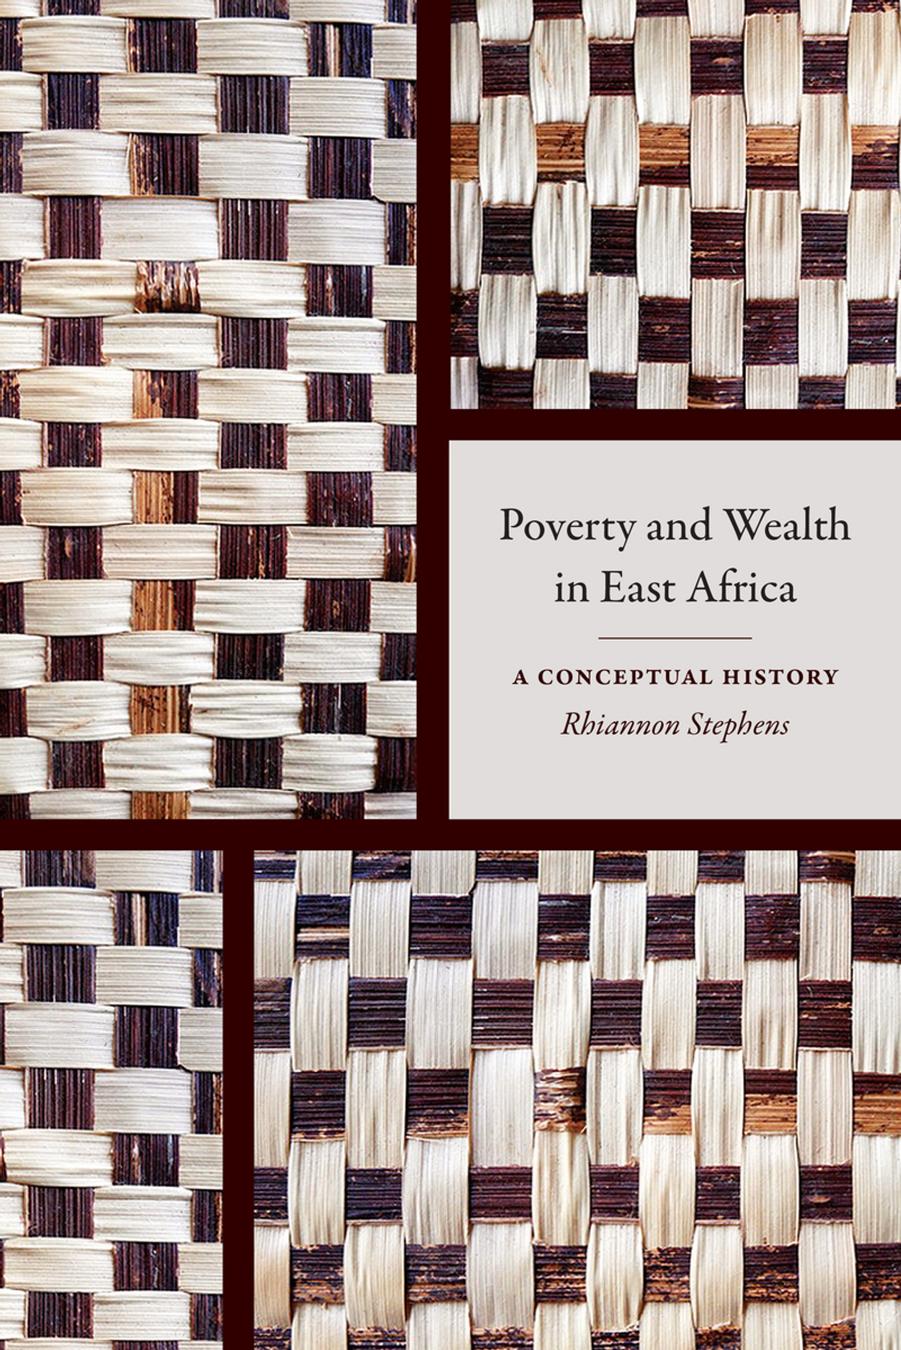 Poverty and Wealth in East Africa: A Conceptual History by Rhiannon Stephens